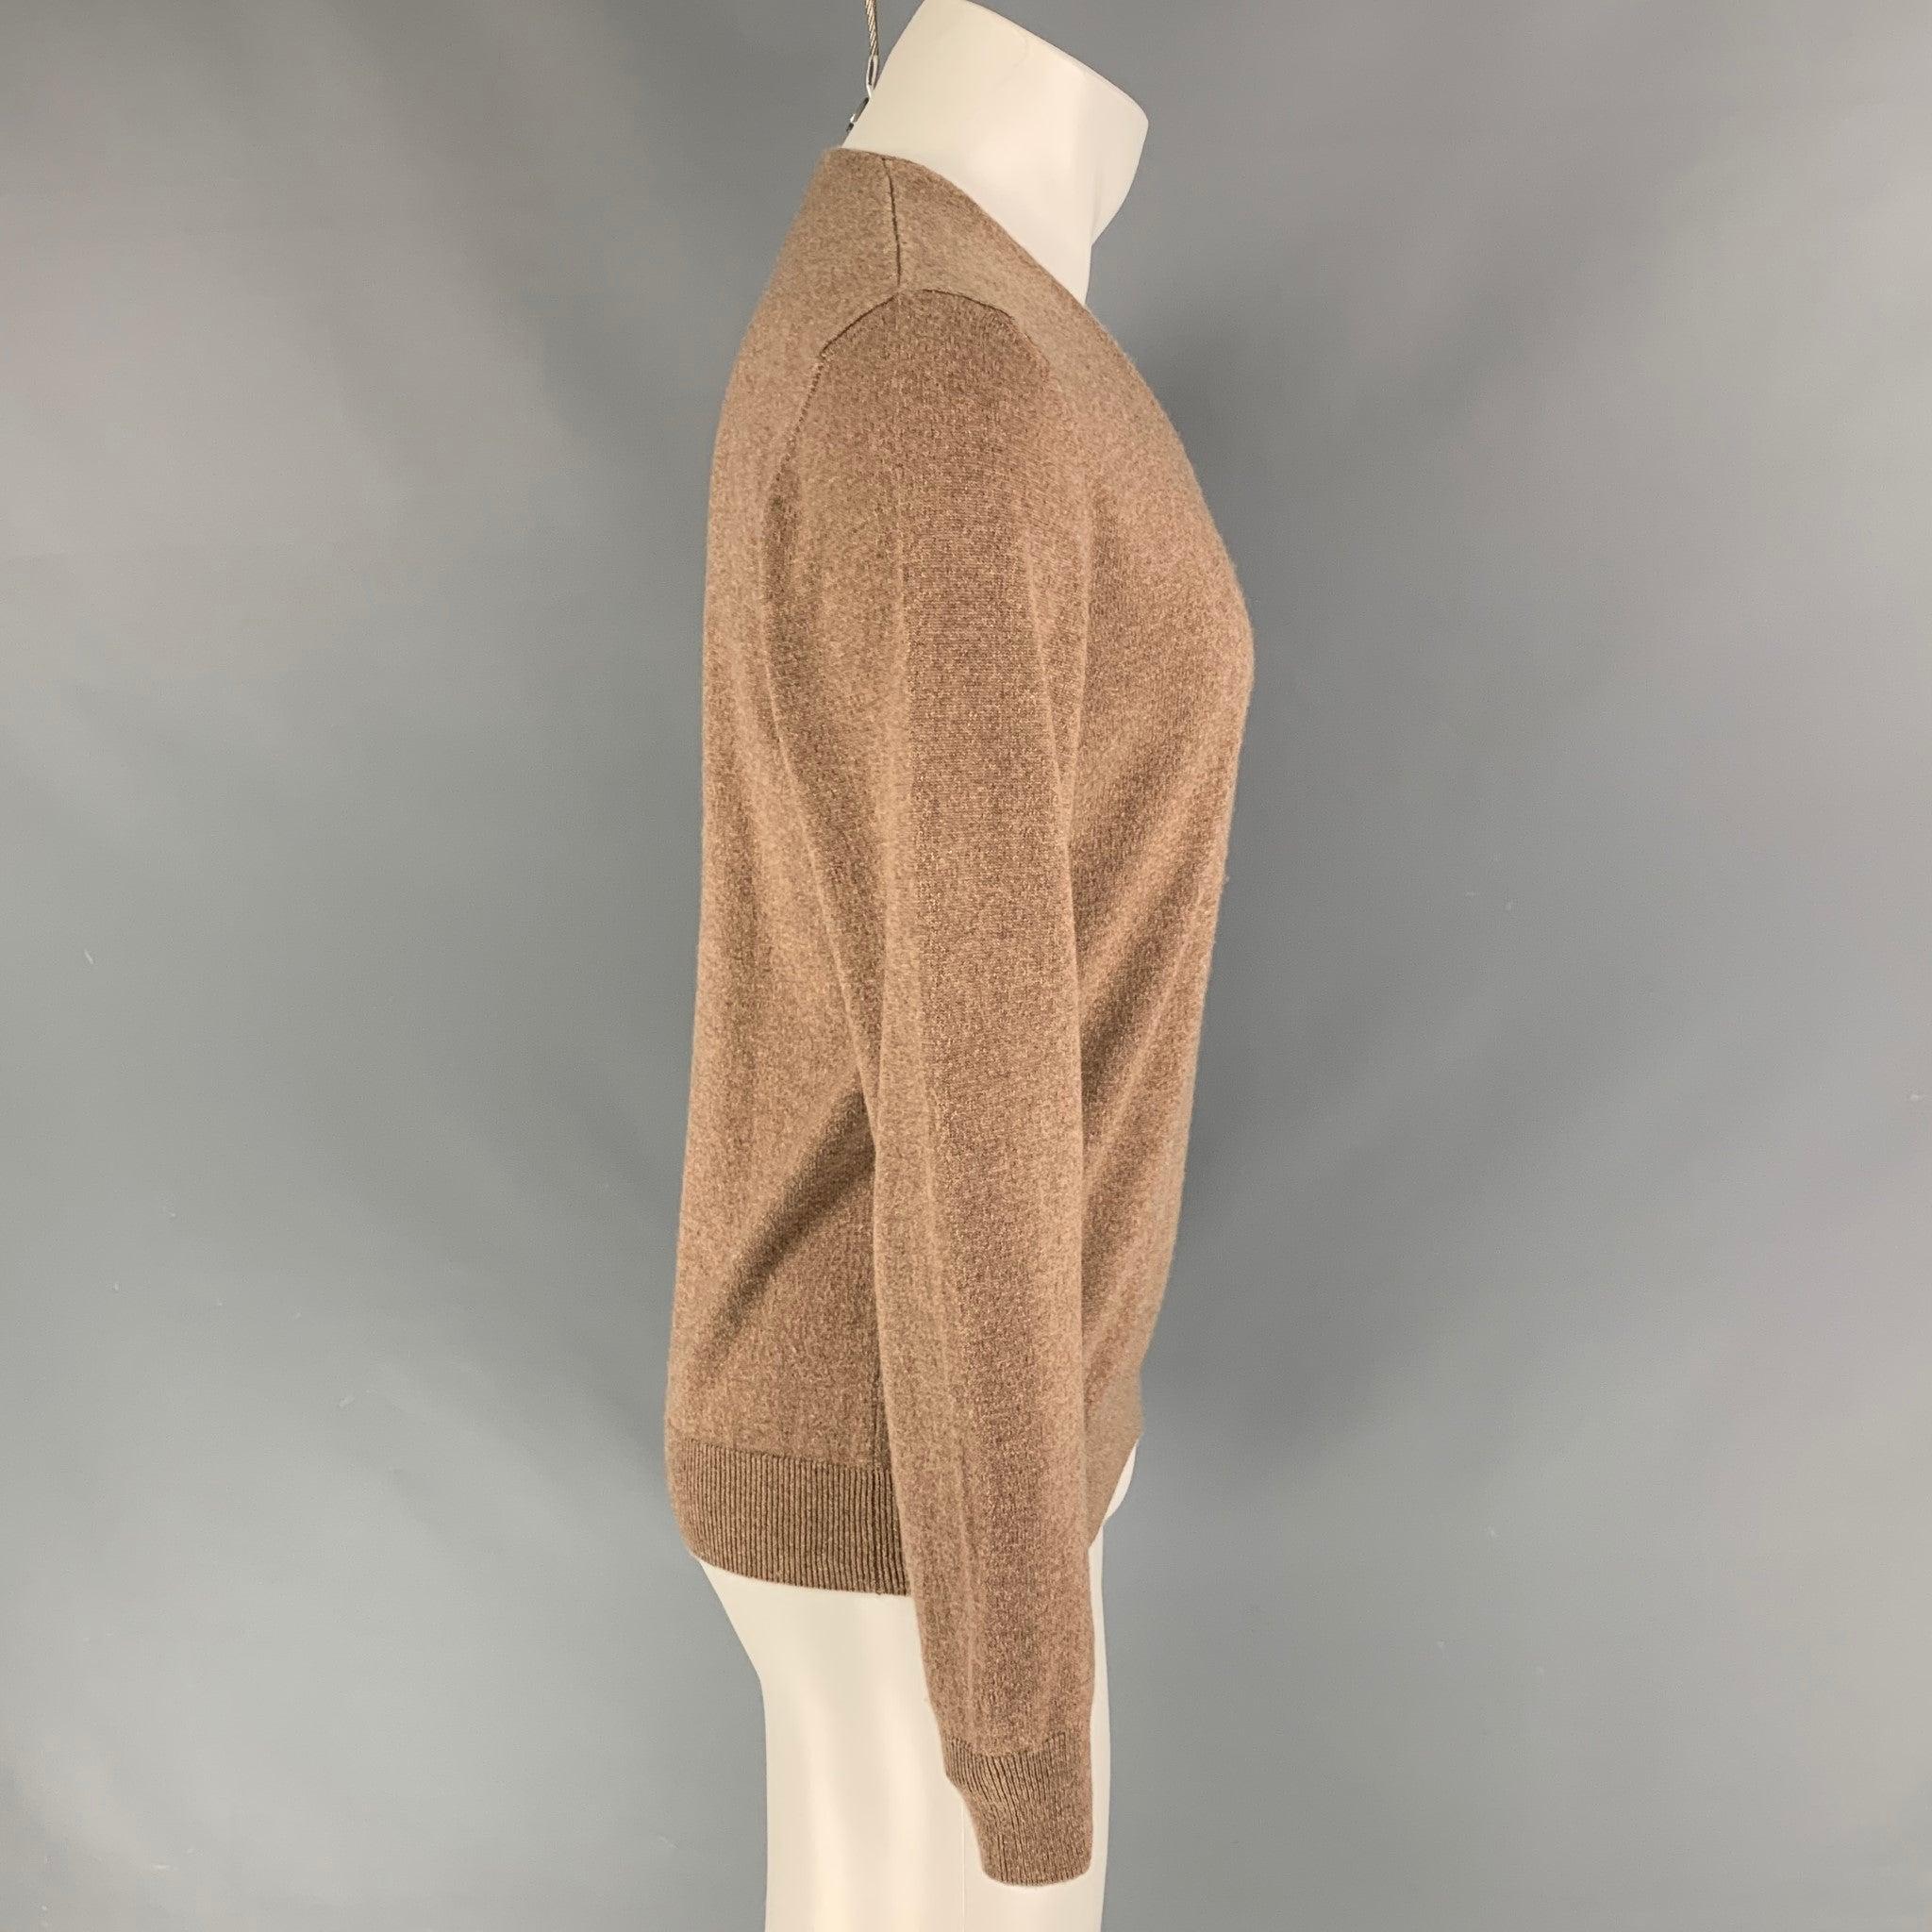 MARTIN MARGIELA pullover comes in a tan cashmere featuring long sleeves and a v-neck. Made in Italy.
Very Good
Pre-Owned Condition. Missing brand tag. 

Marked:   Size tag removed.  

Measurements: 
 
Shoulder: 16.5 inches  Chest: 40 inches  Sleeve: